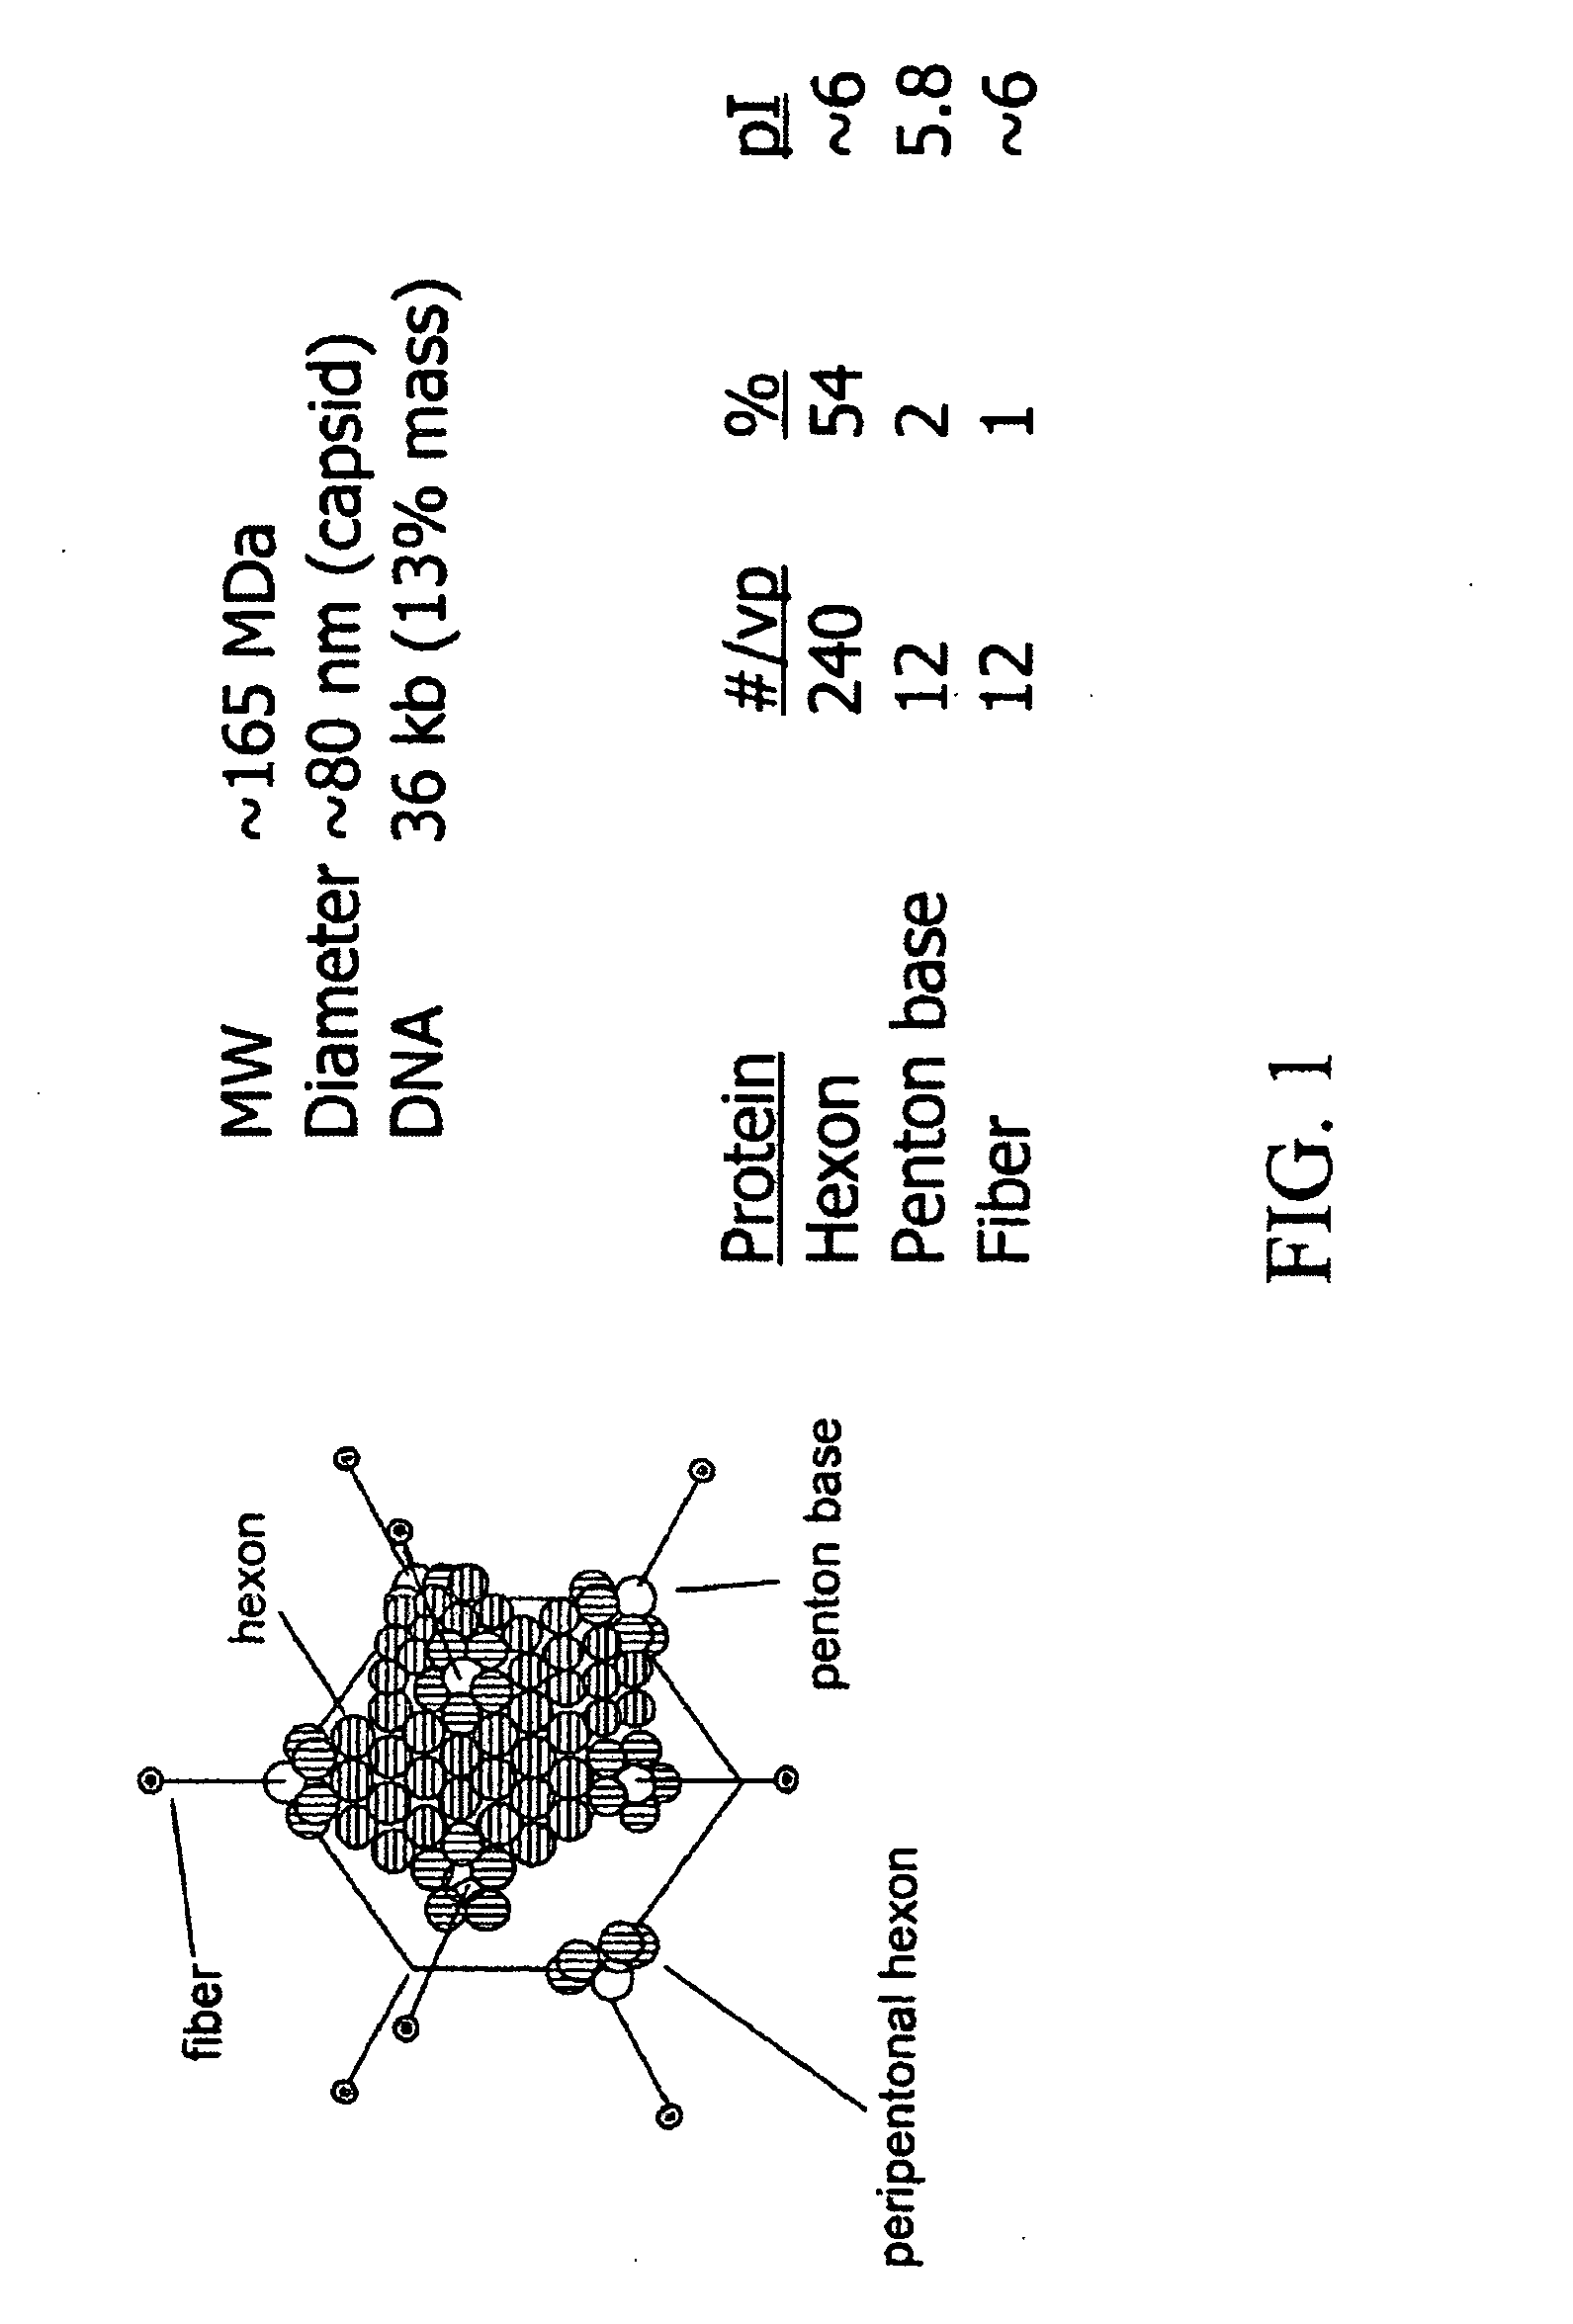 Apparatus and methods for increasing lateral mass transfer over molecule sensors